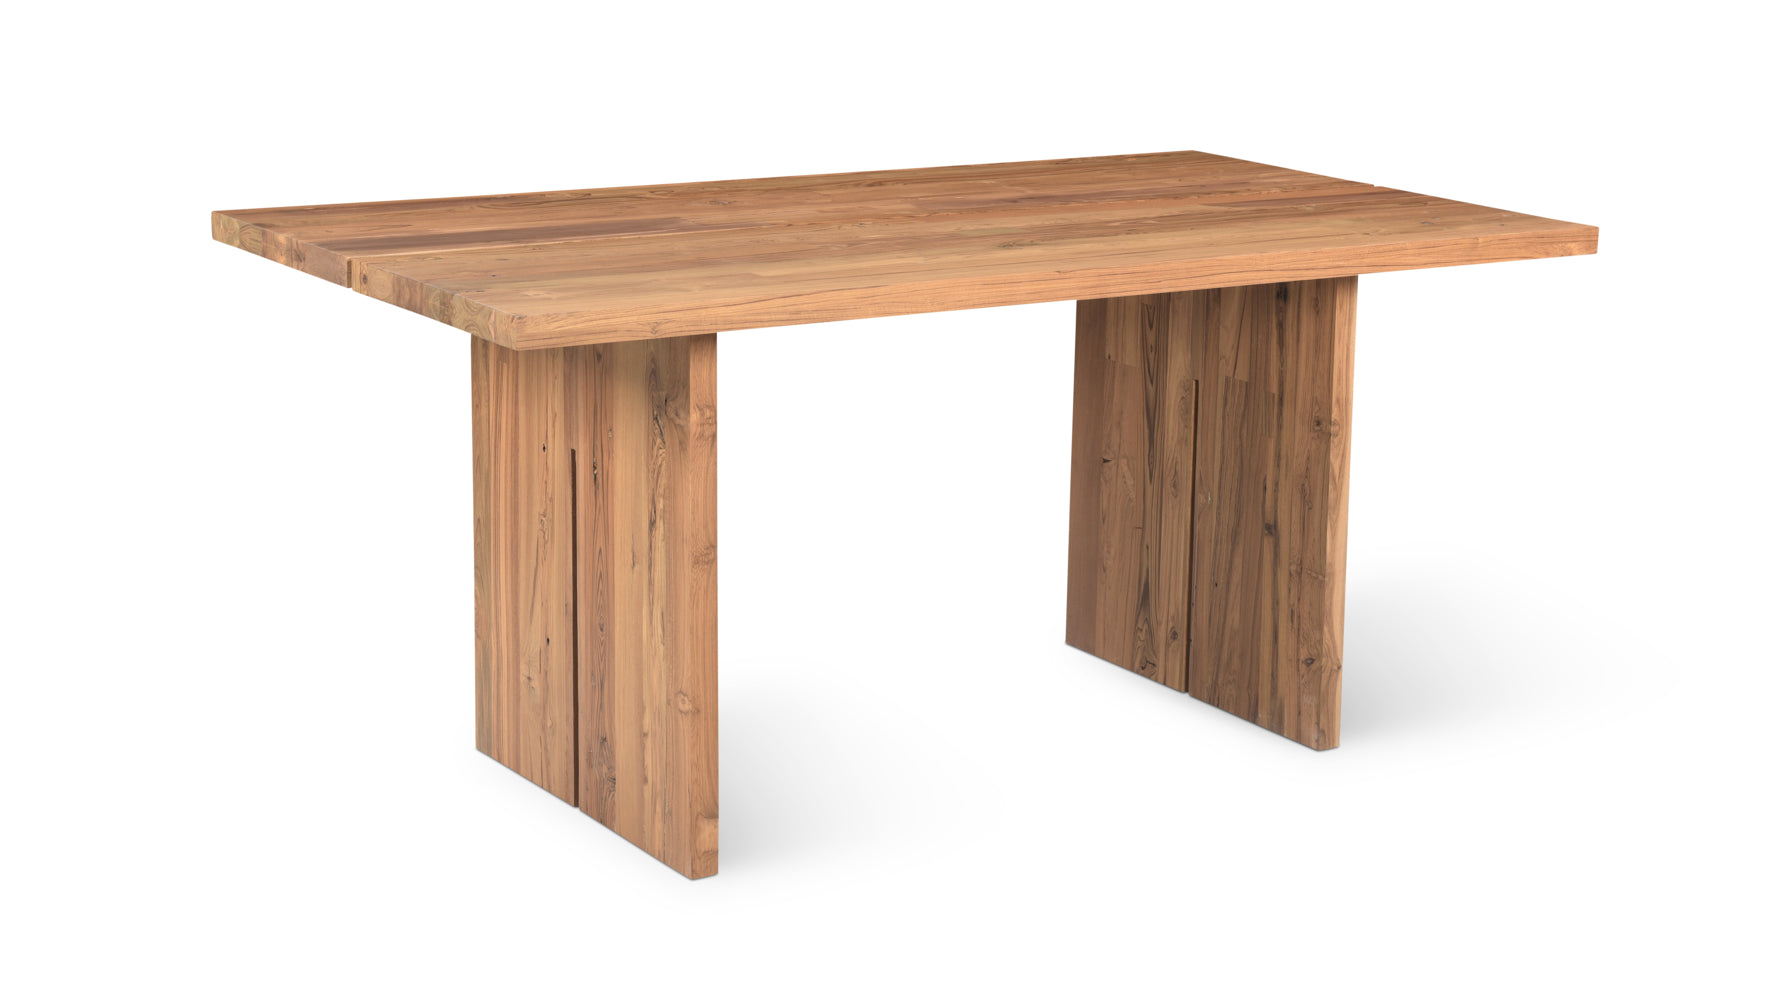 Plane Outdoor Dining Table, Seats 6-8, Teak - Image 1